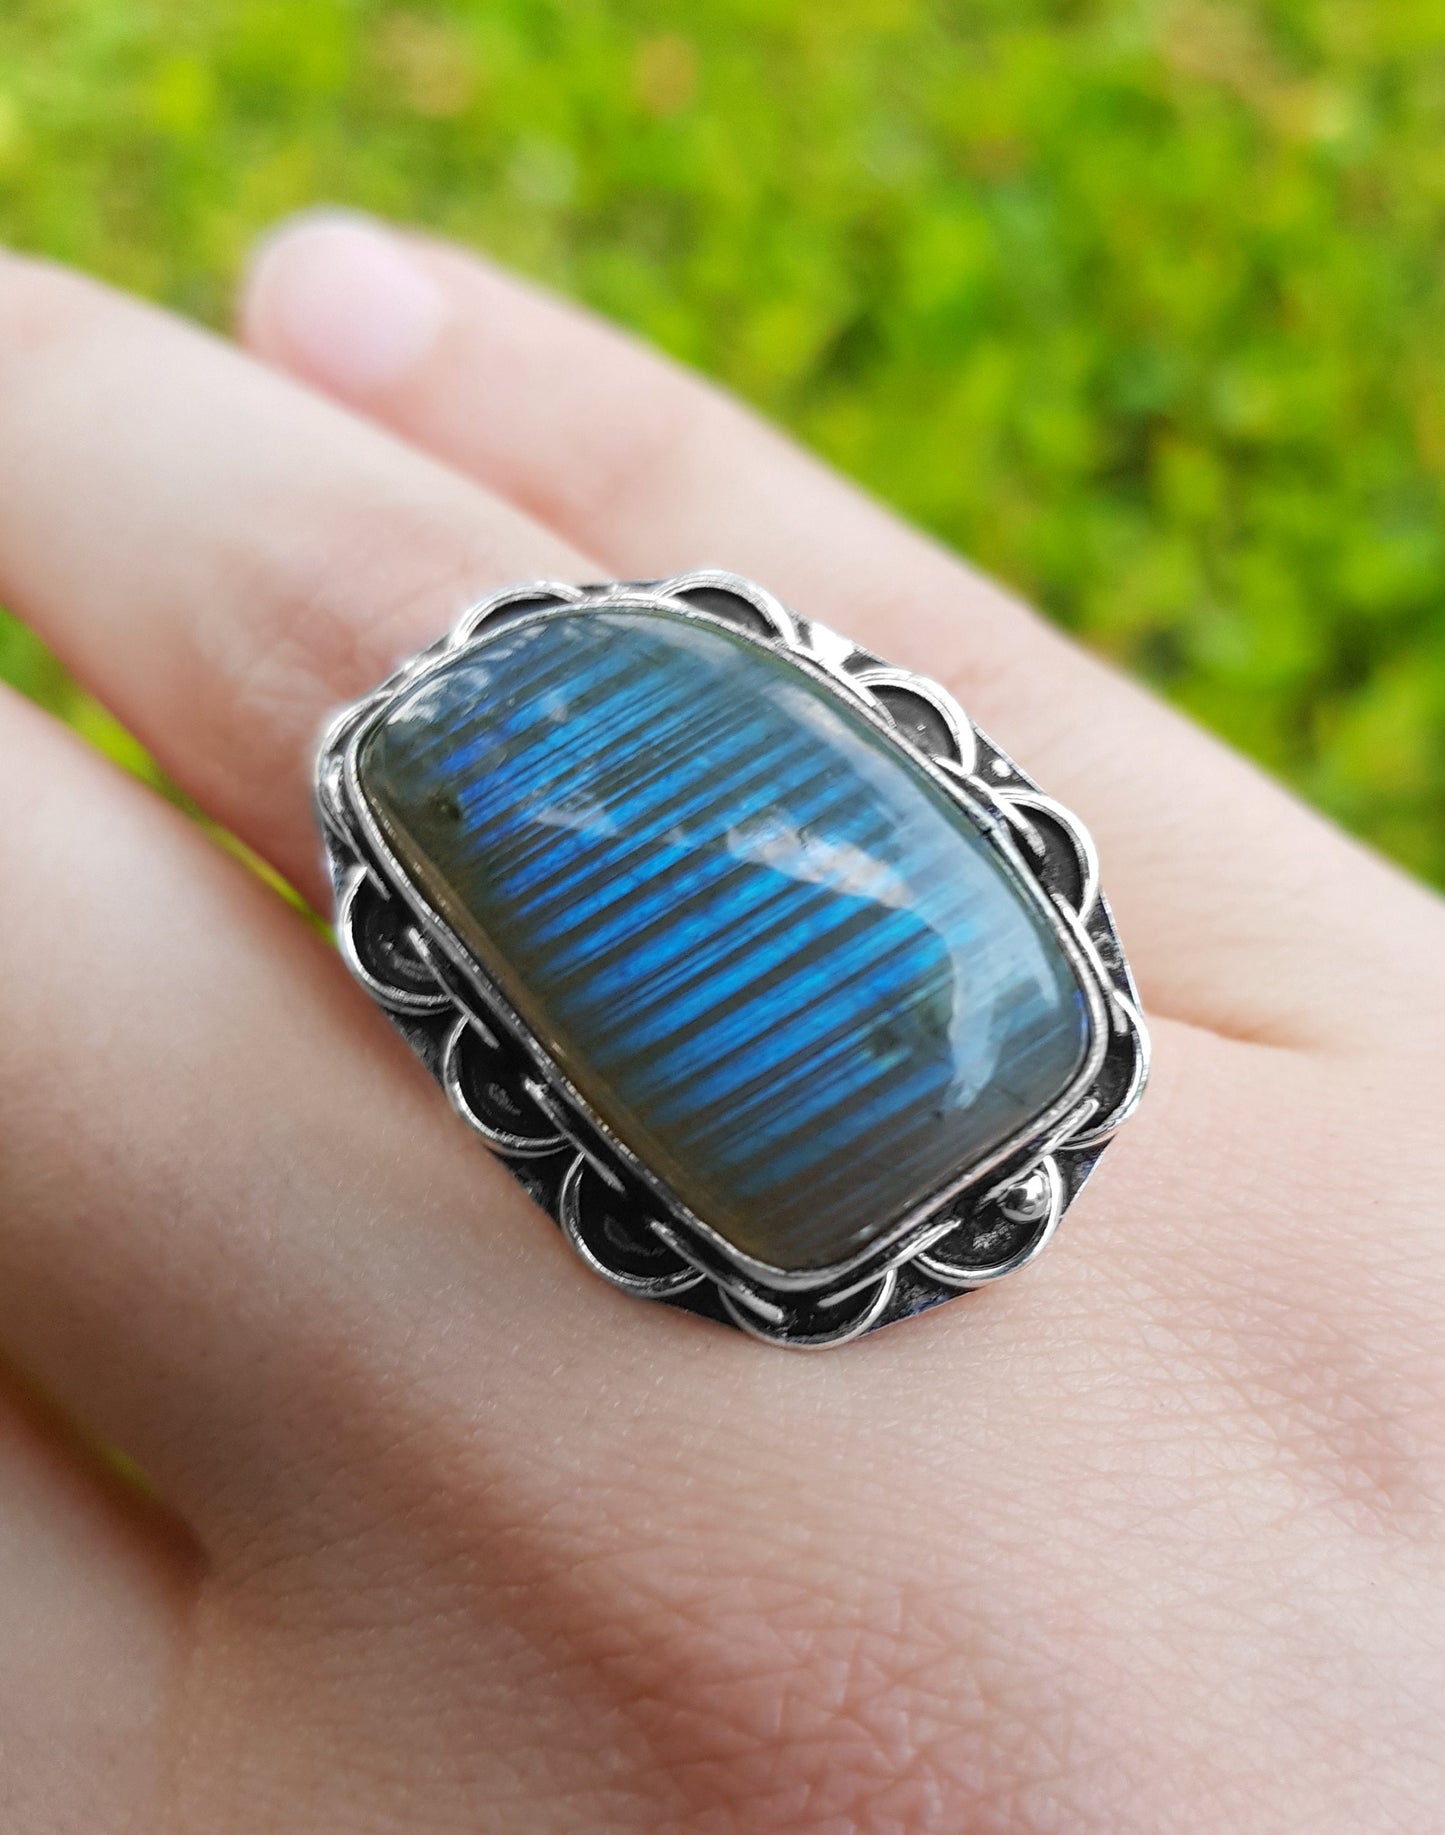 Labradorite Ring Size US 8 1/2 In Sterling Silver Big Statement Ring Gemstone Ring Boho Rings Unique Gift For Her Ethnic Ring GypsyJewelry